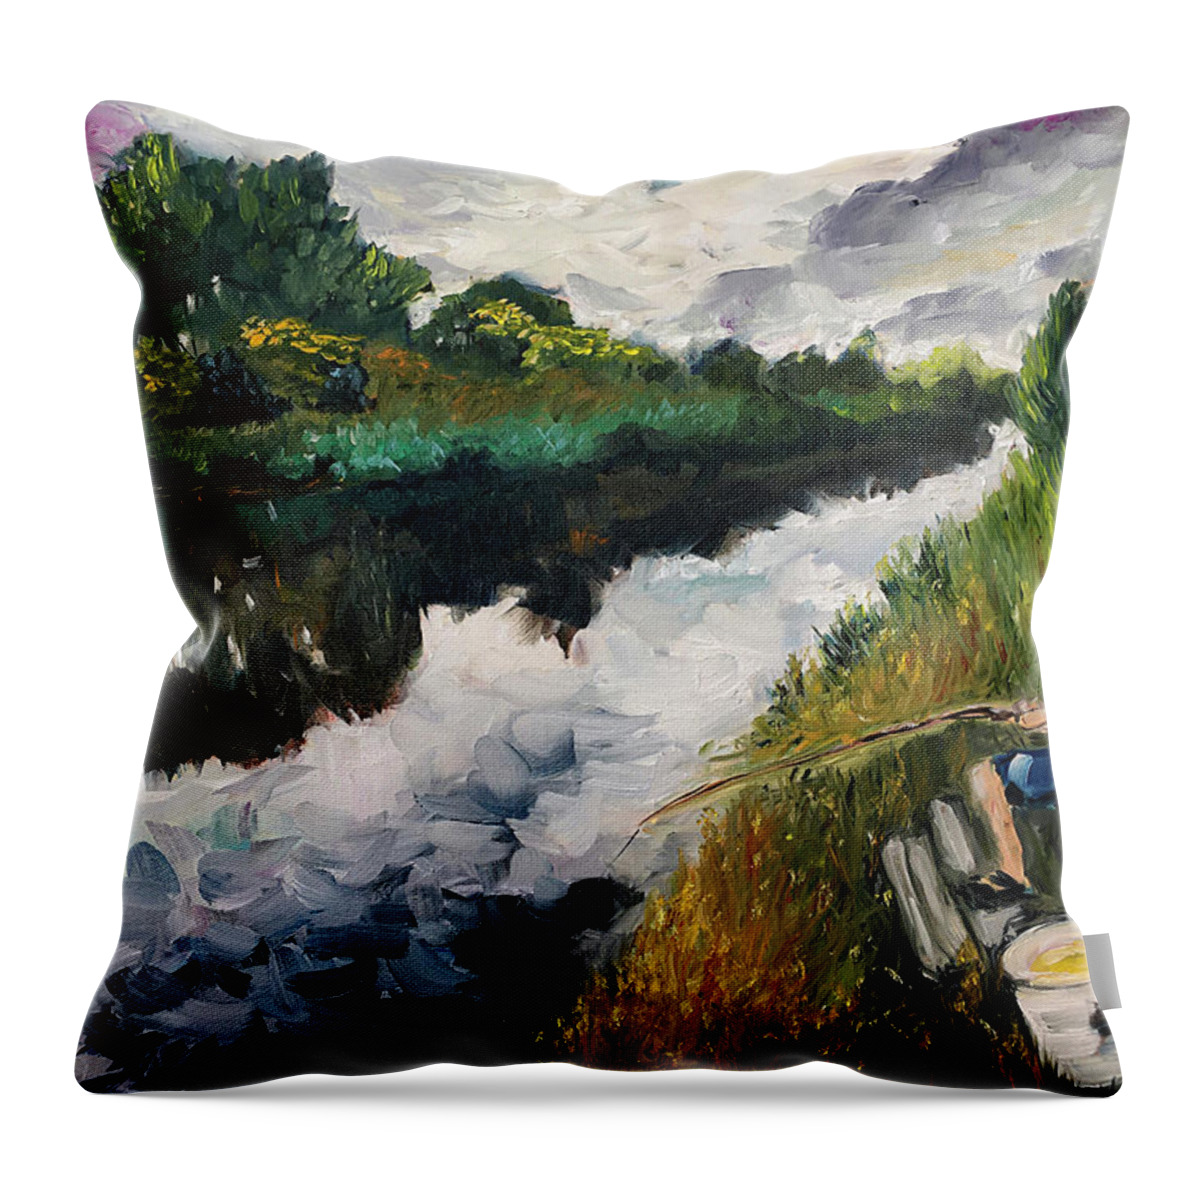 Fishing Throw Pillow featuring the painting Fishing in Groningen by Roxy Rich